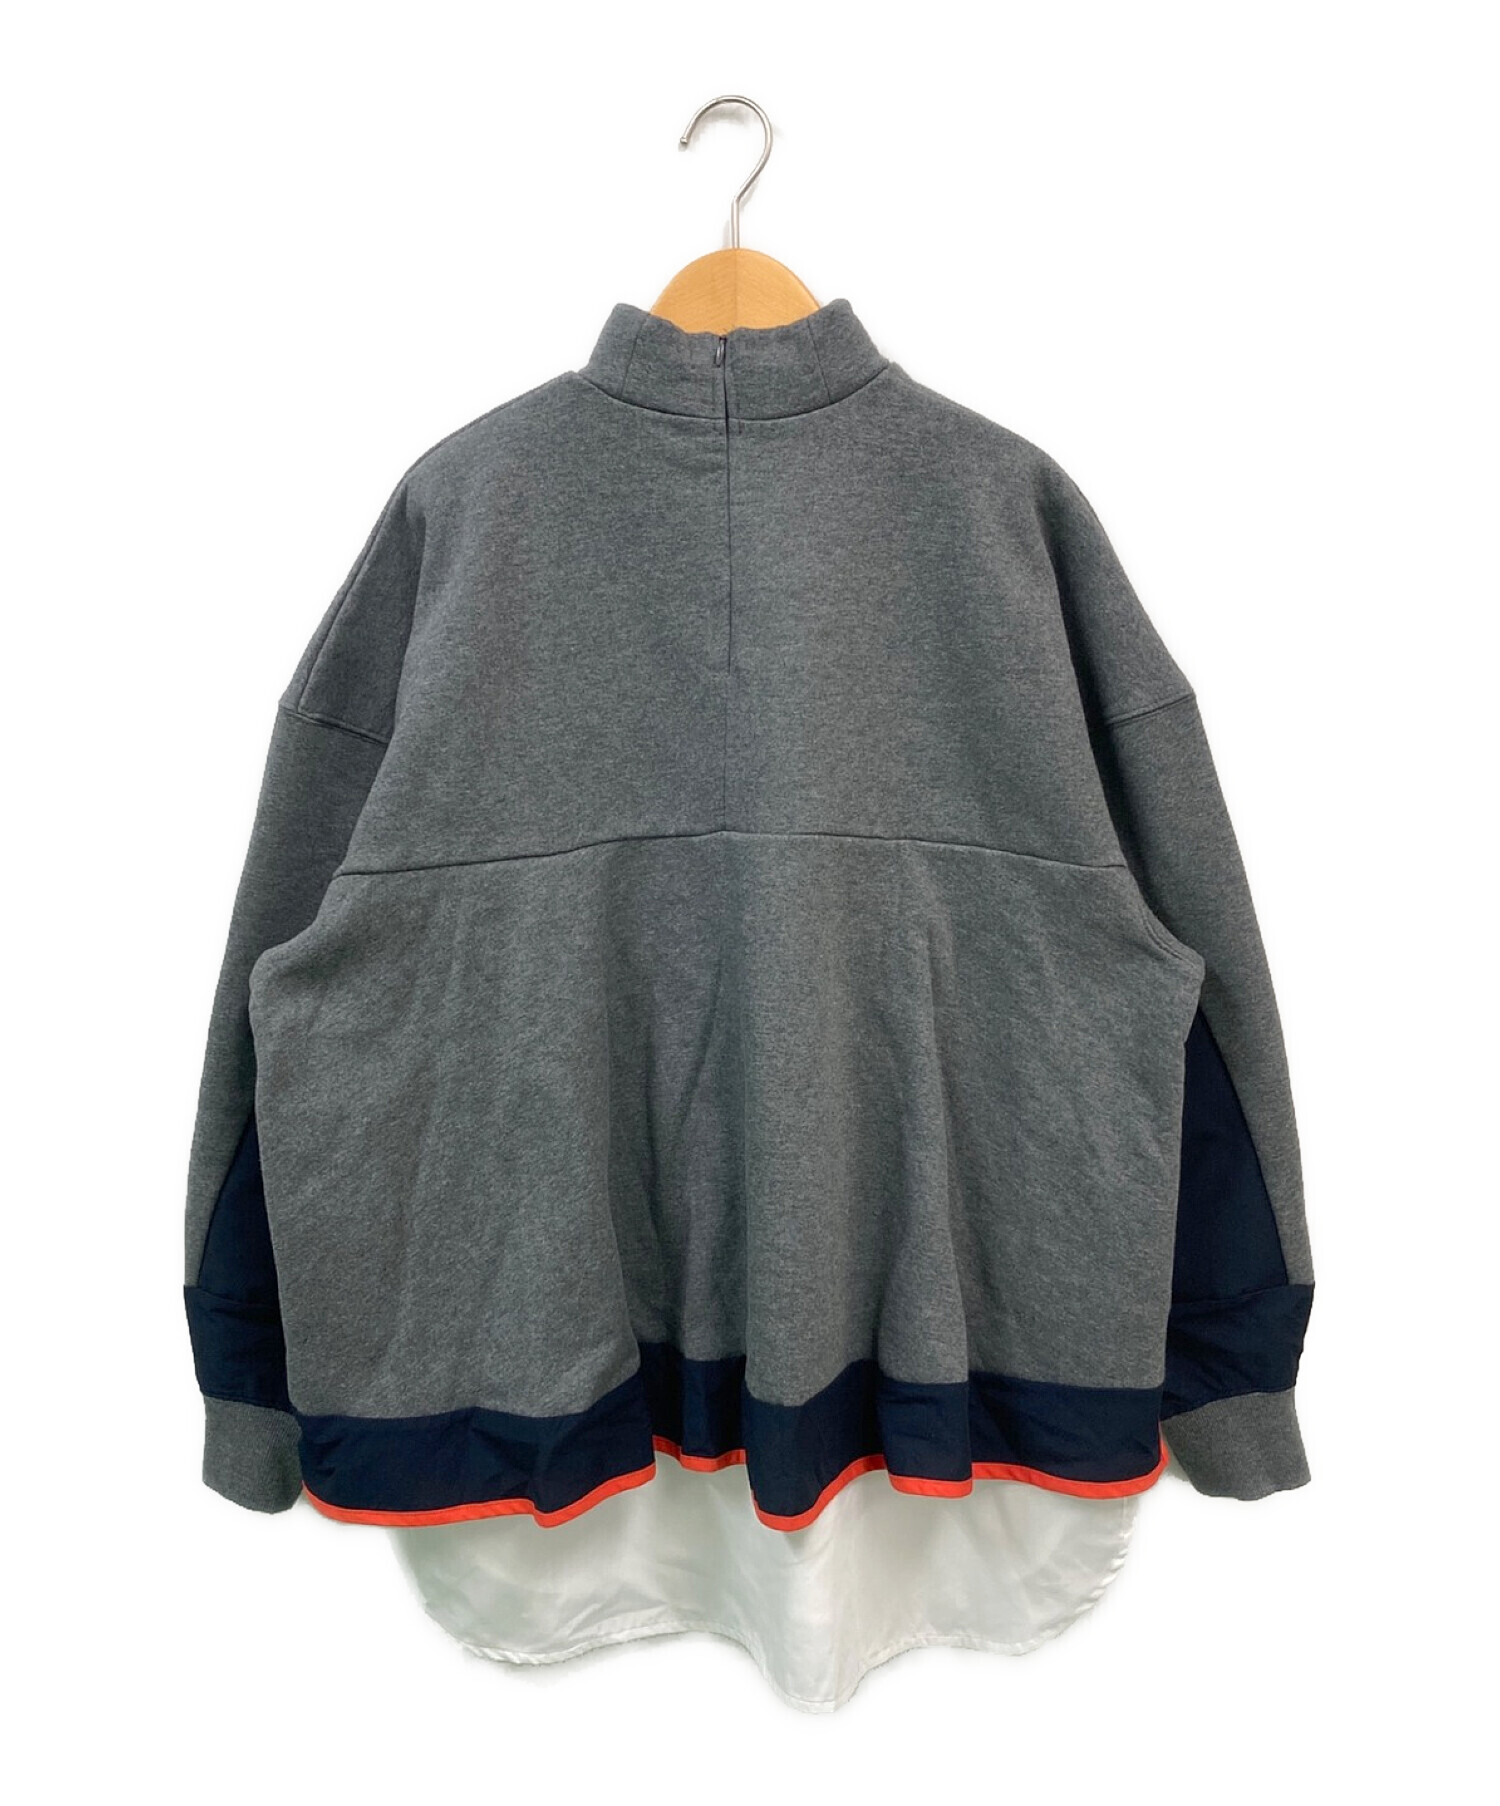 nagonstans  combination layered pullover